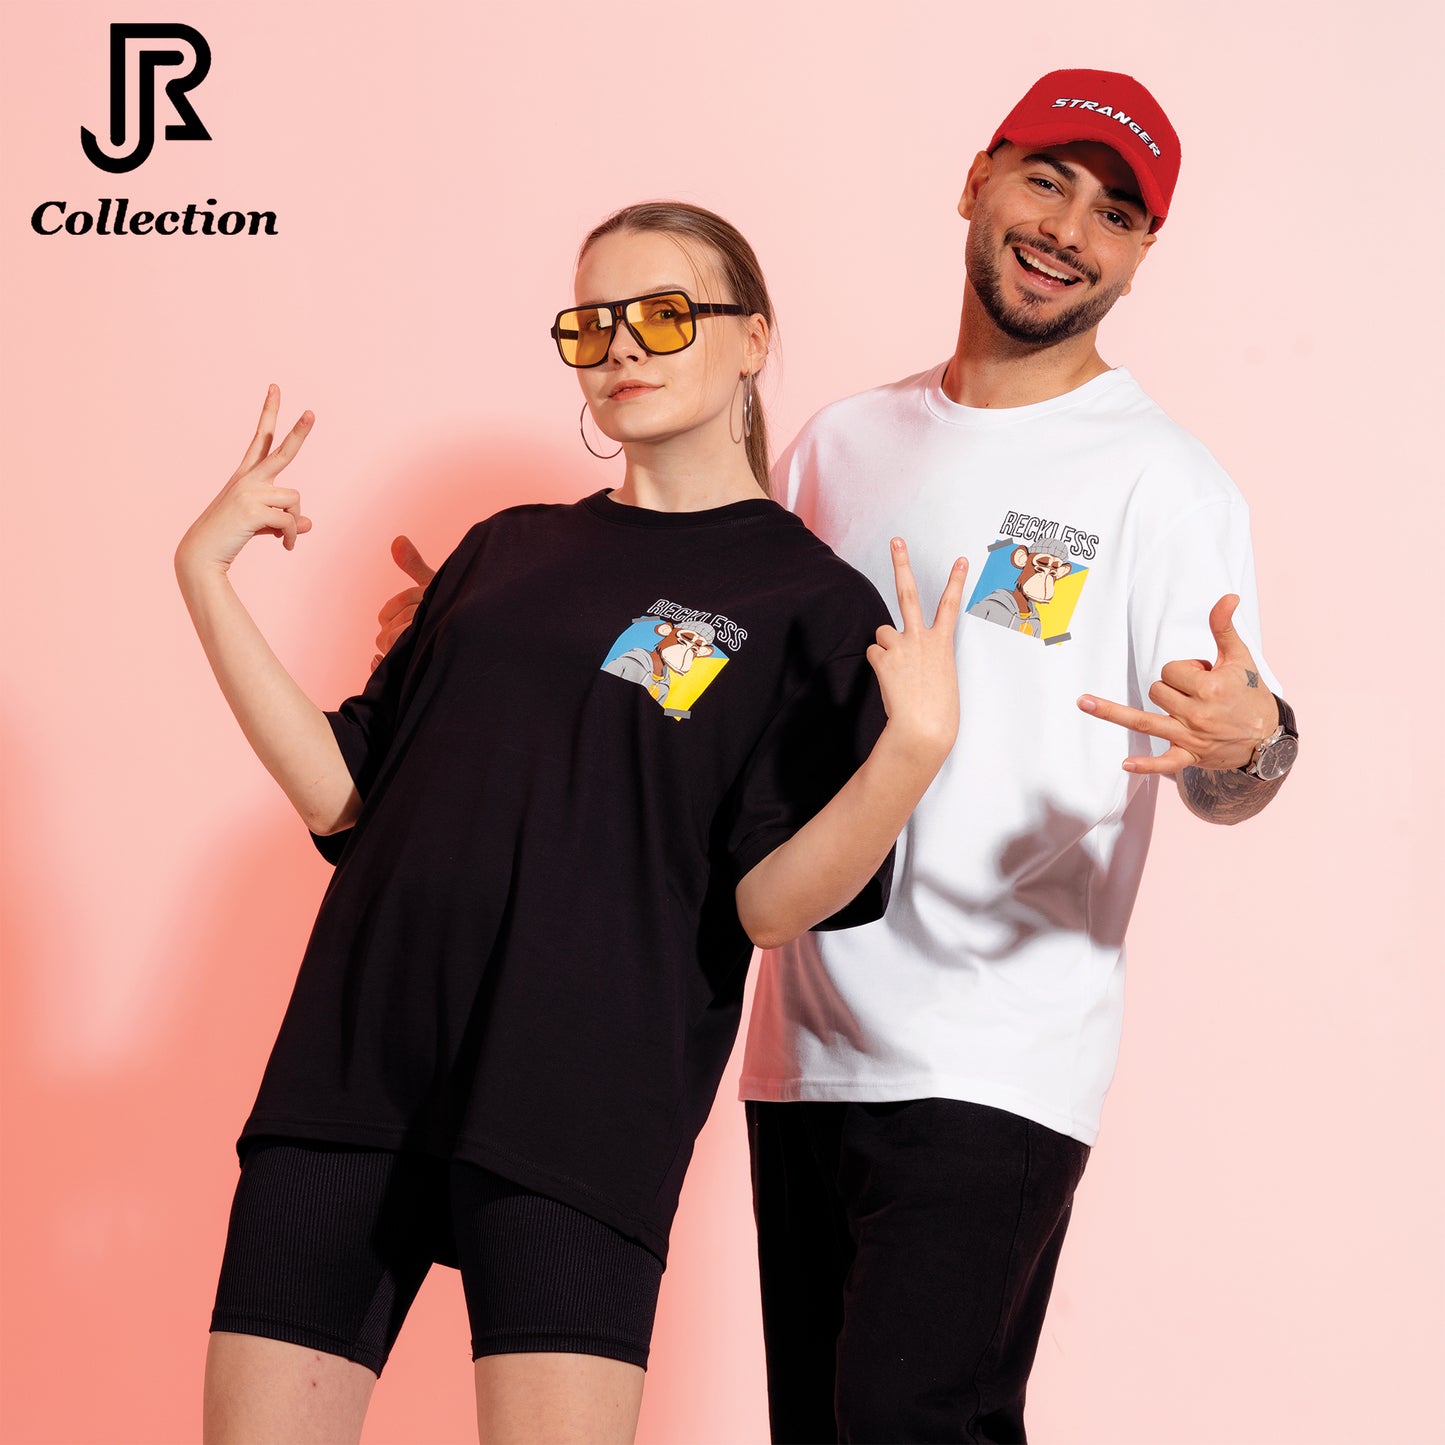 "Oversized High-Quality T-Shirt (% 100 Eco-Friendly Cotton), Durable, Fashionable and Stylish, Unisex, Designed by RJ Collection"